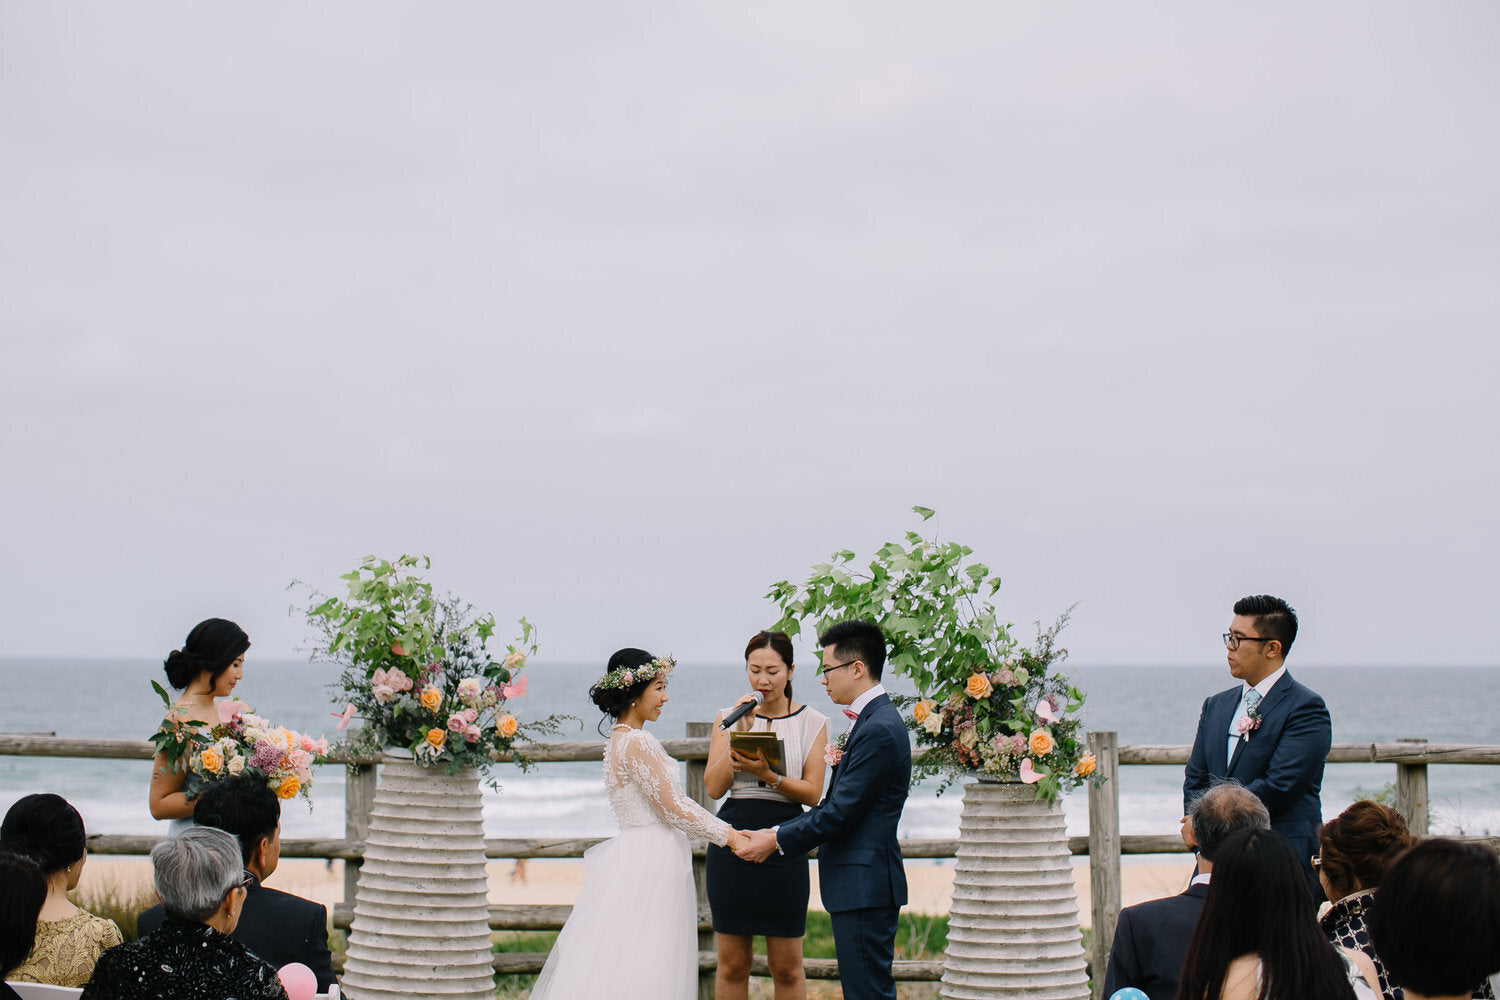 couple getting married at horizons slsc maroubra